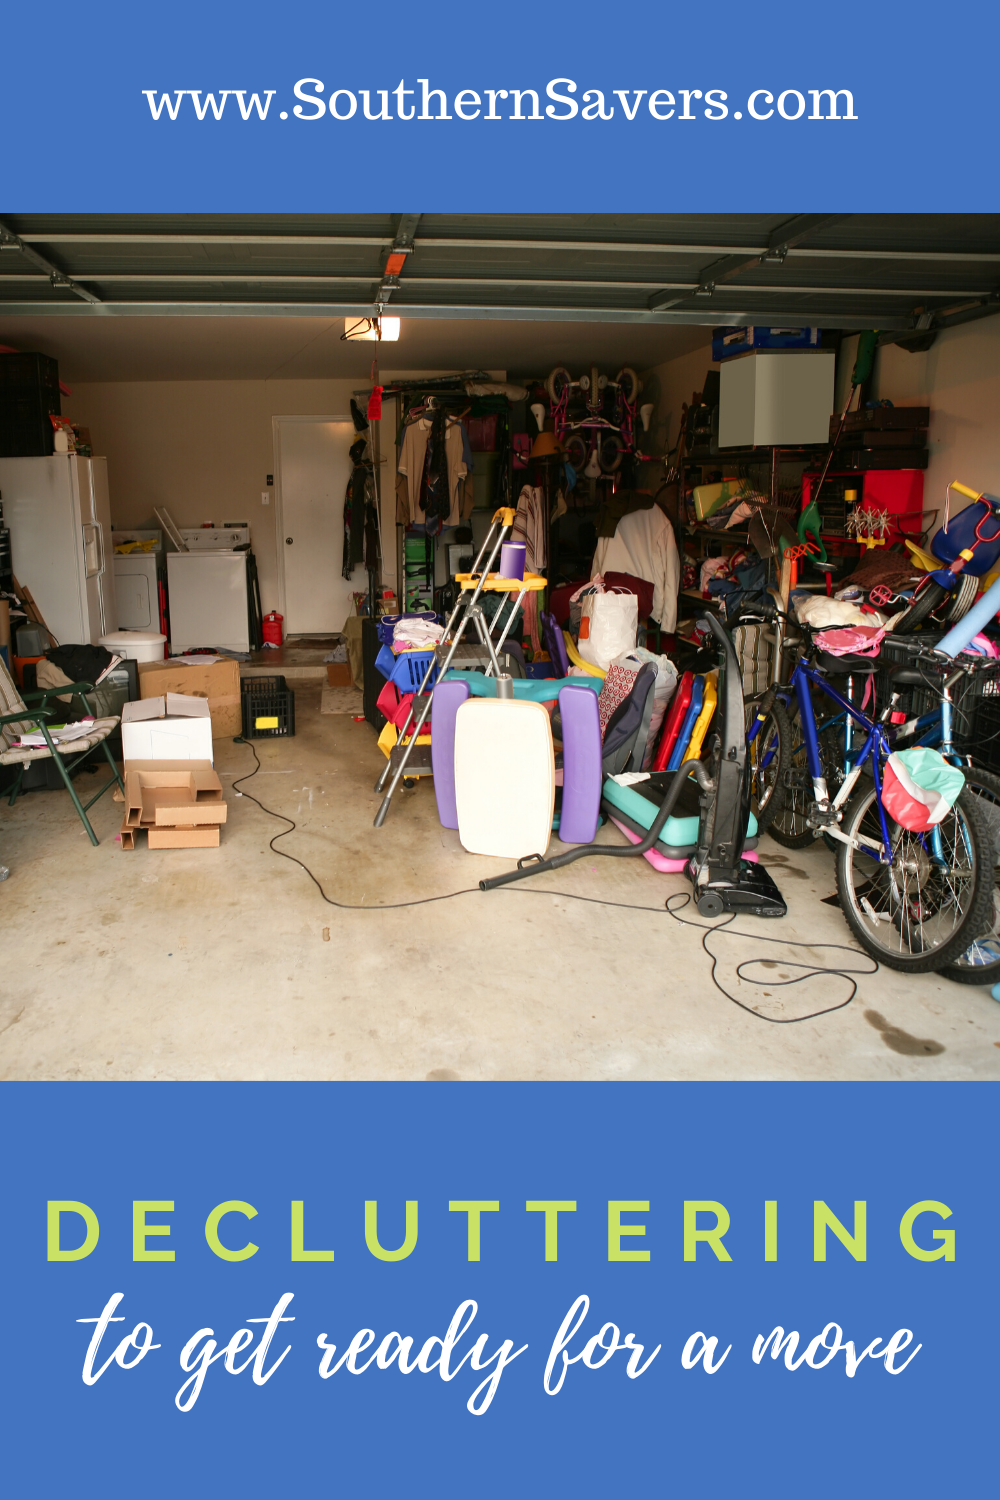 If you are planning to move anytime soon, one way to make the transition smoother is to start decluttering. Here are my favorite tips!